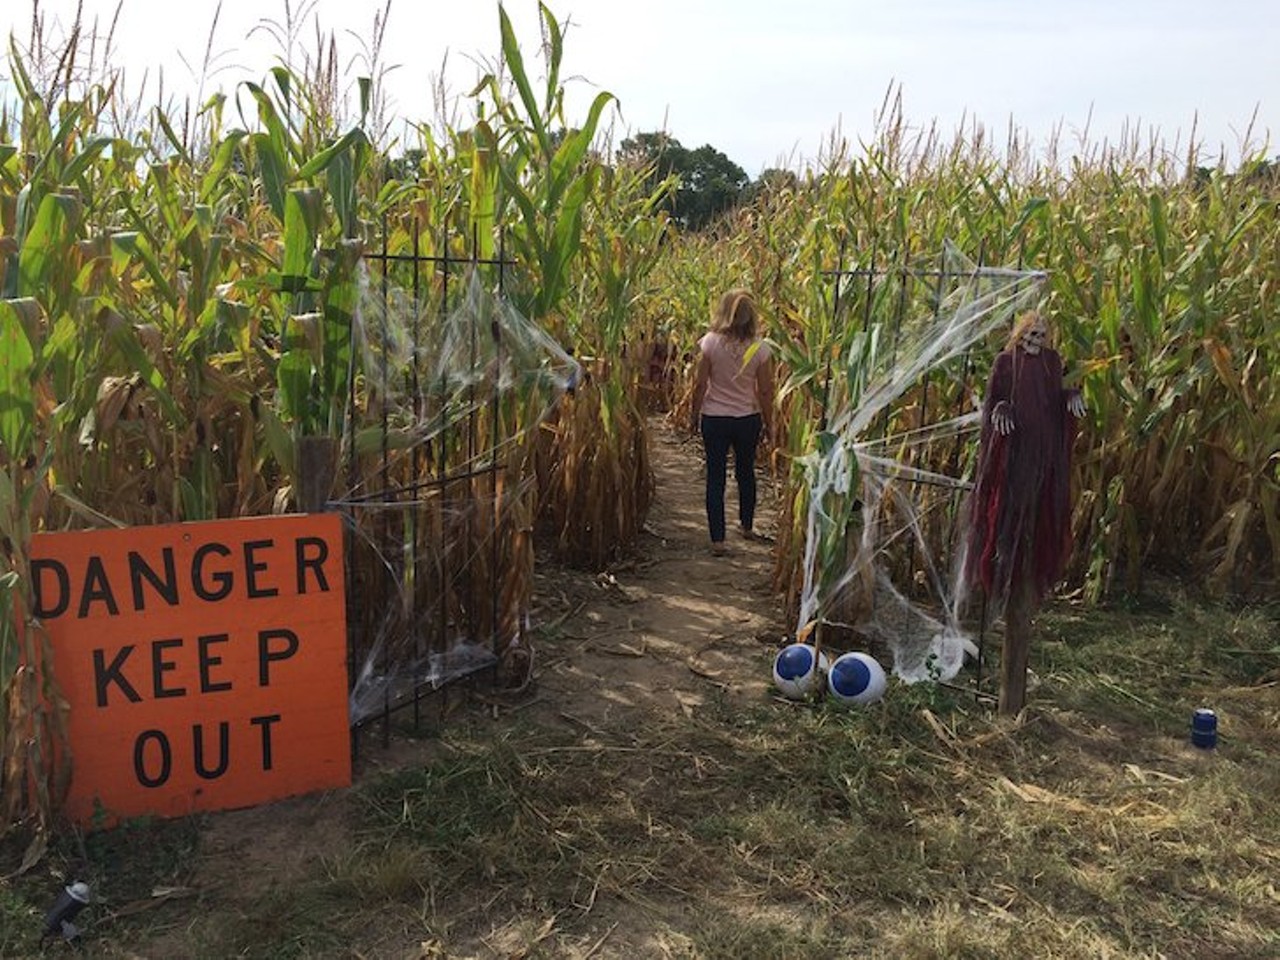 Bonadeo Farms
1215 White Lake Rd., Highland Twp.; 248-787-4553; bonadeofarms.com
The haunted corn maze and haunted house at Bonadeo Farms is back this season. Why not add a little spook to your pumpkin patch adventures?
Photo via Bonadeo Farm/Facebook